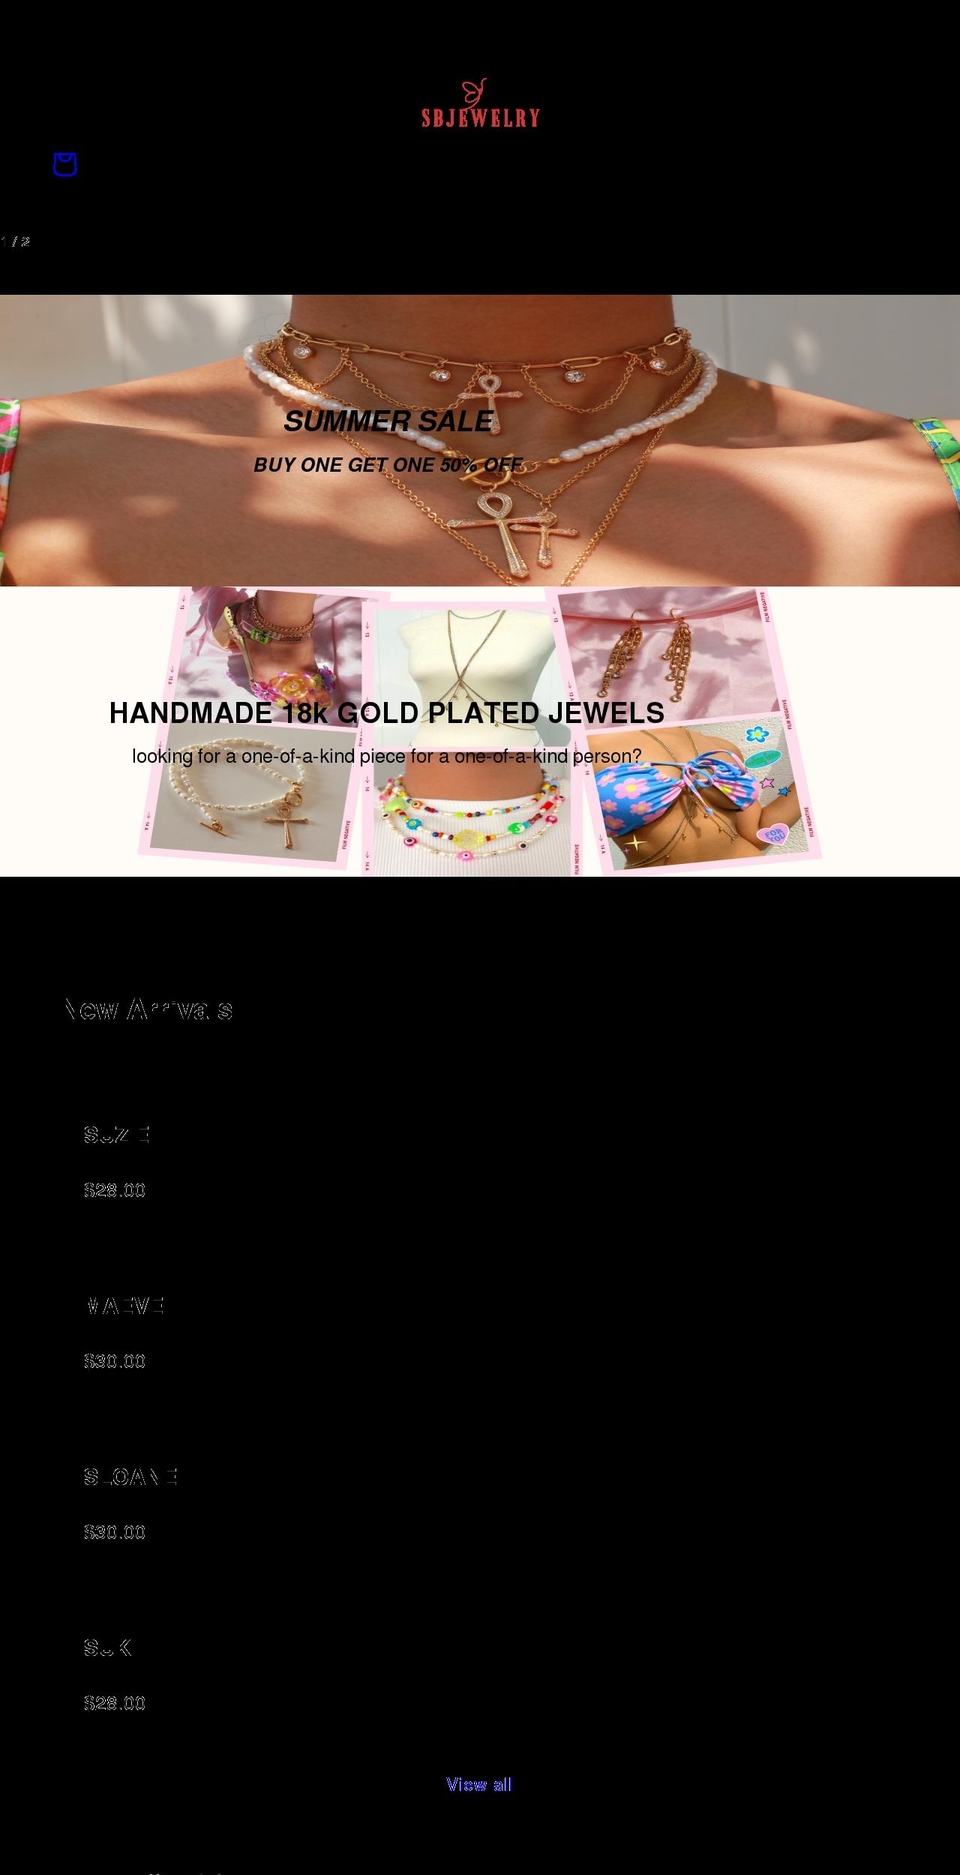 Updated copy of Crave Shopify theme site example sbjewelryshop.com